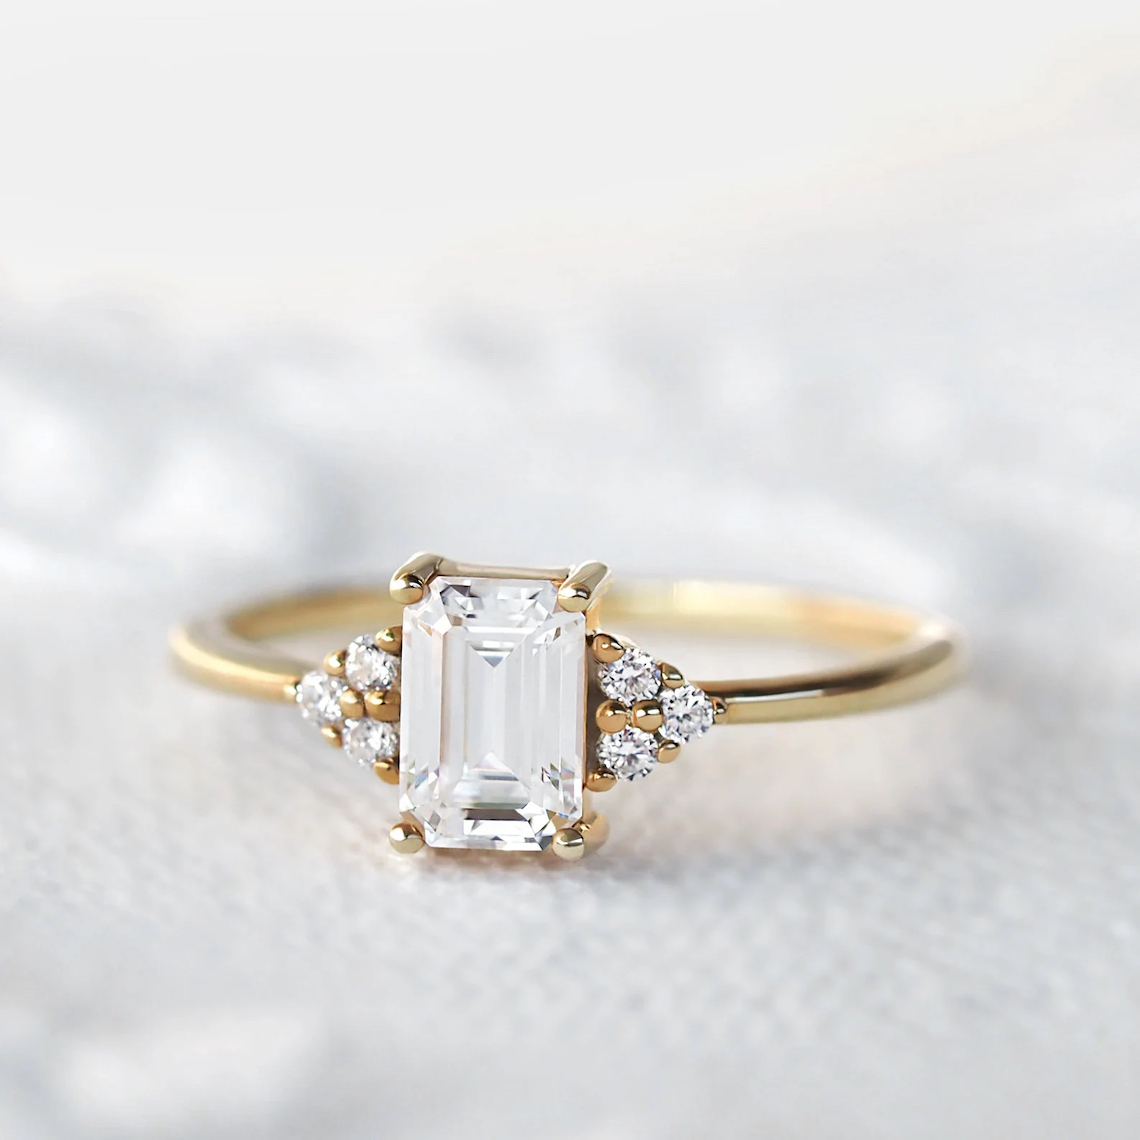 Yes, you can find a stunning engagement ring under $1,000!